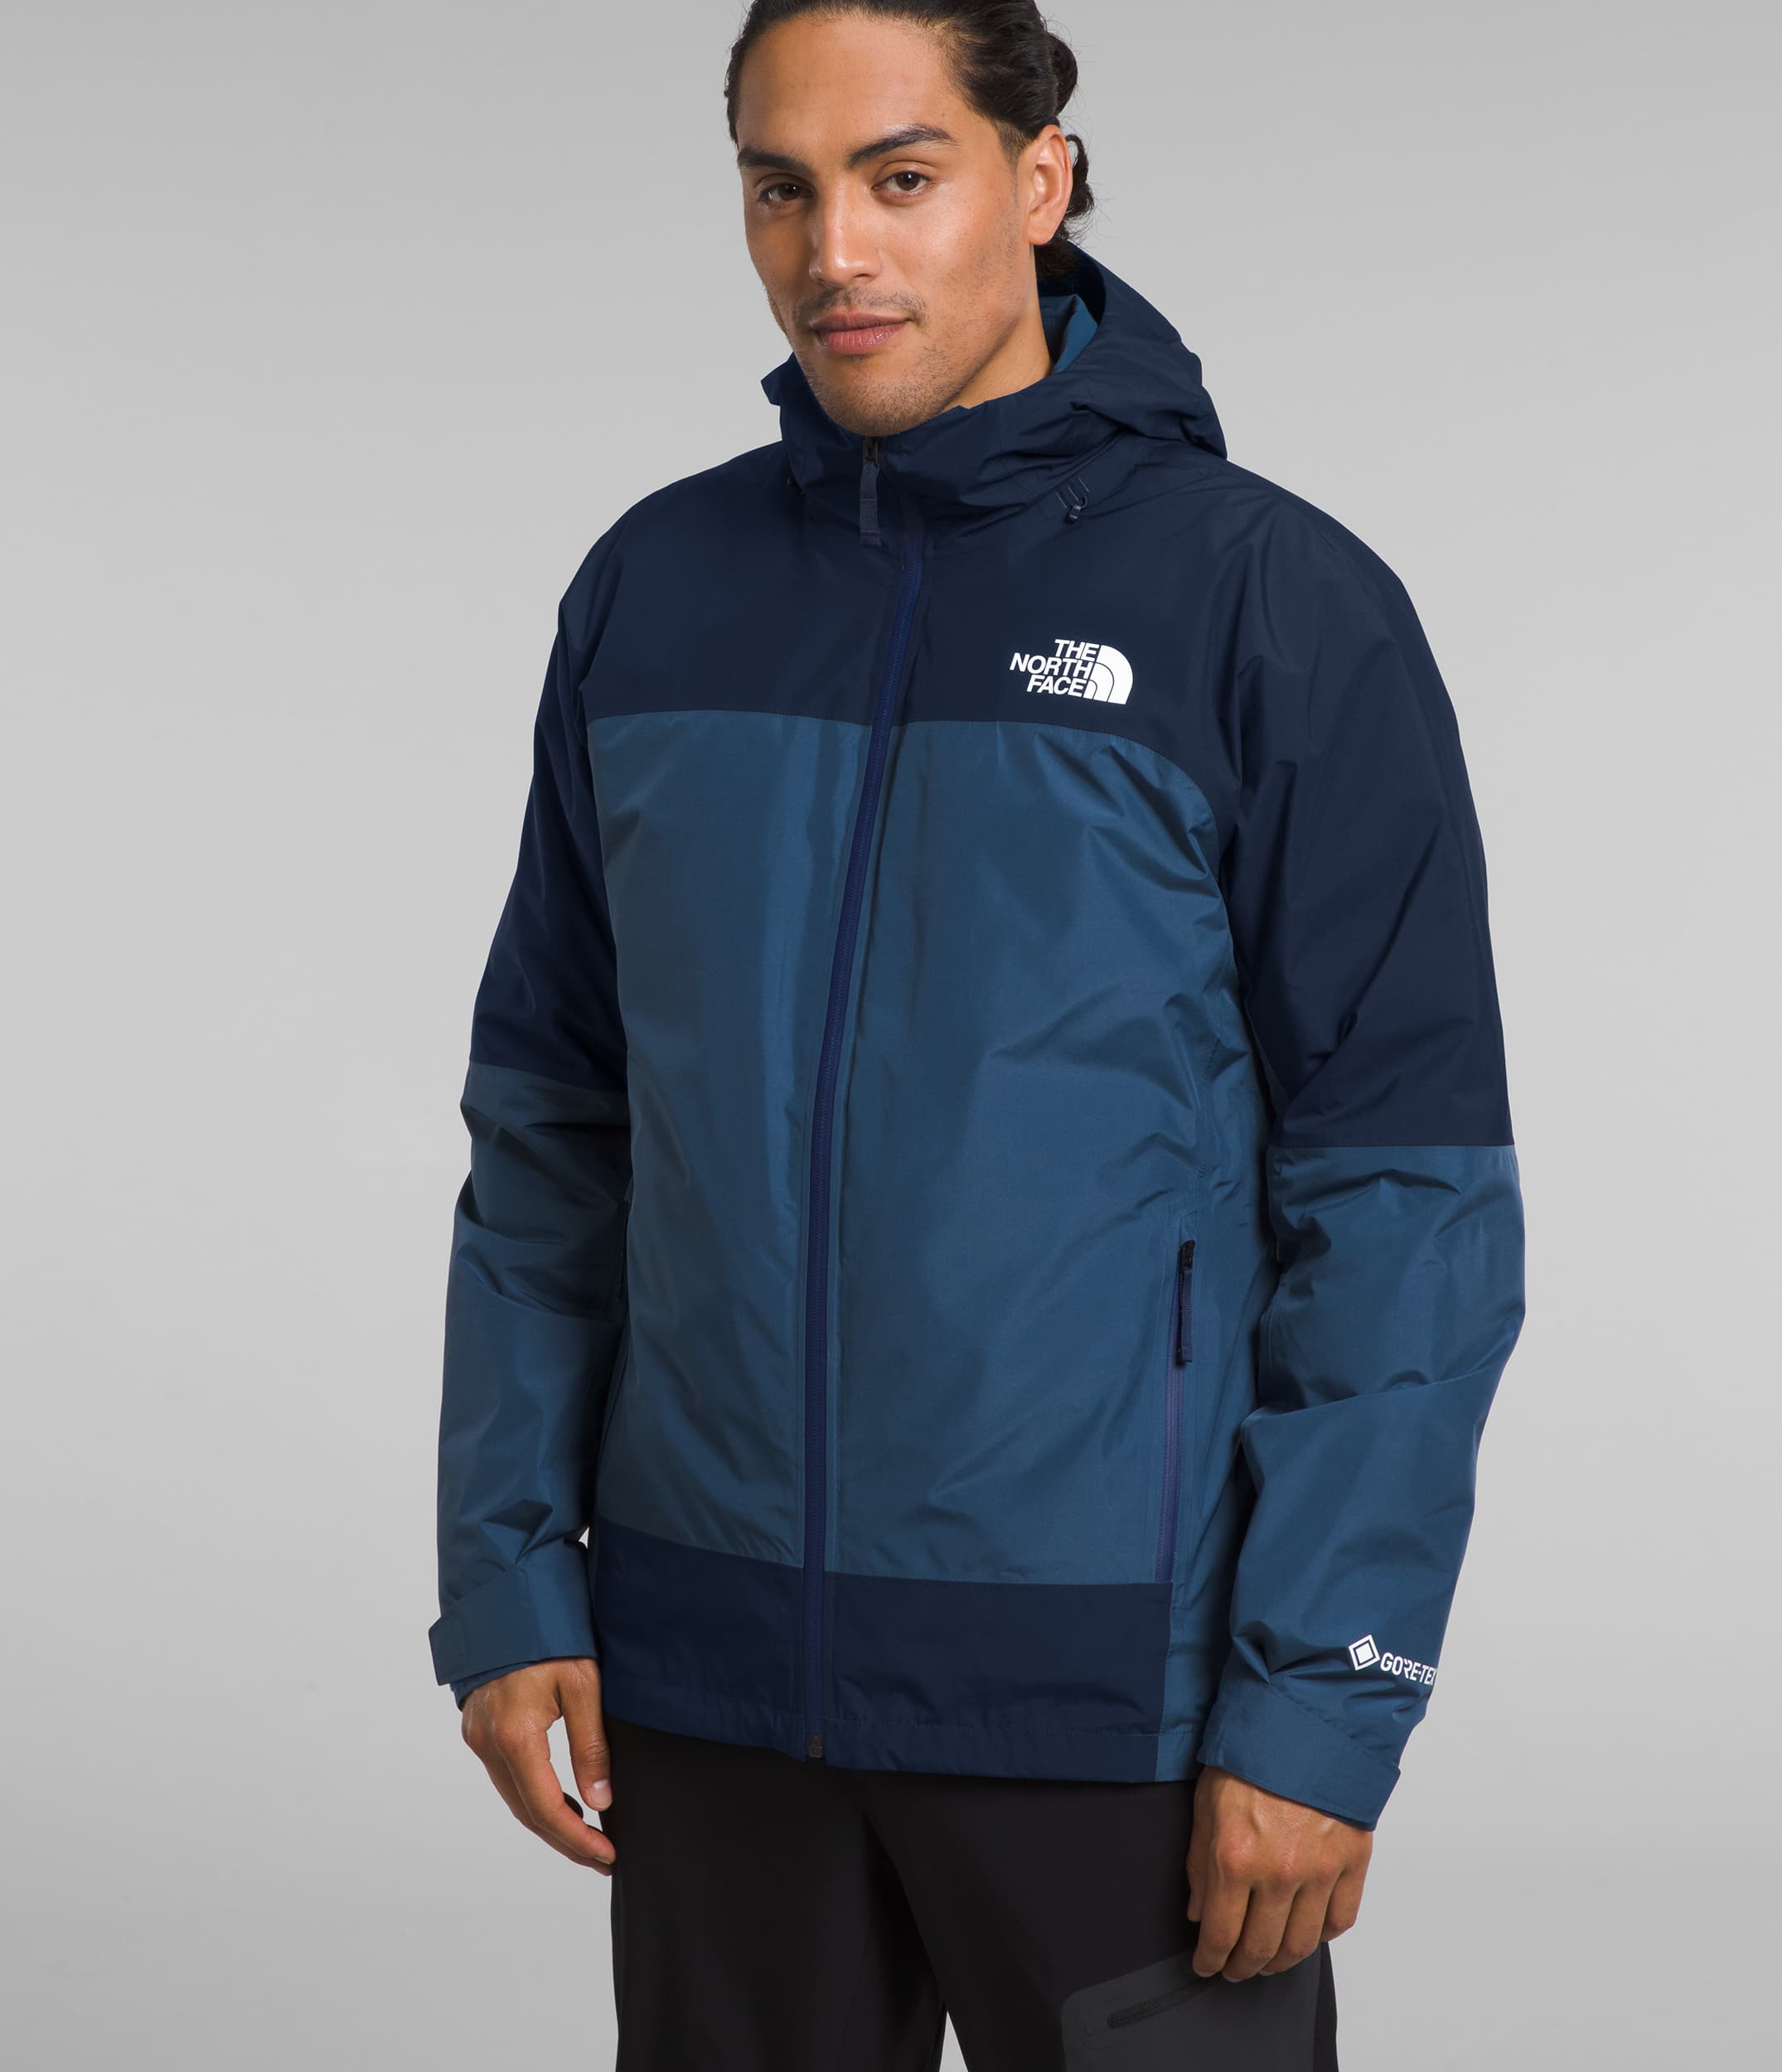 Prairie Summit Shop - The North Face Men's Mountain Light Triclimate ...